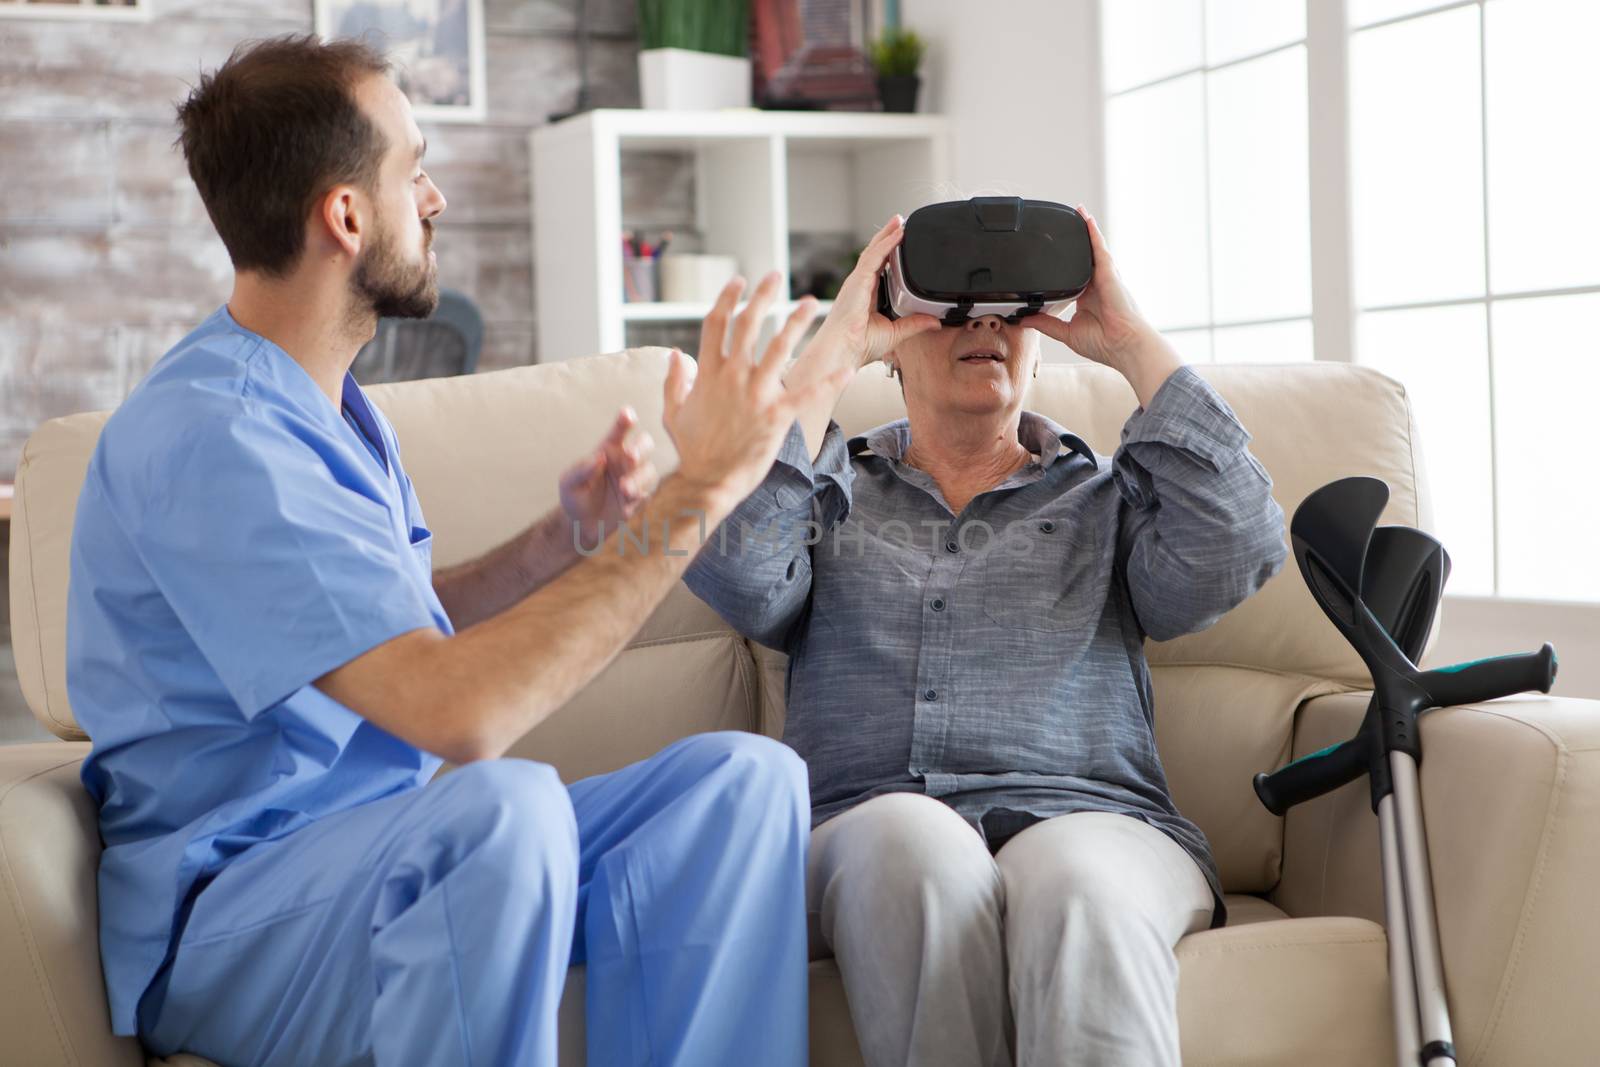 Elderly aged woman using virtual reality glasses by DCStudio